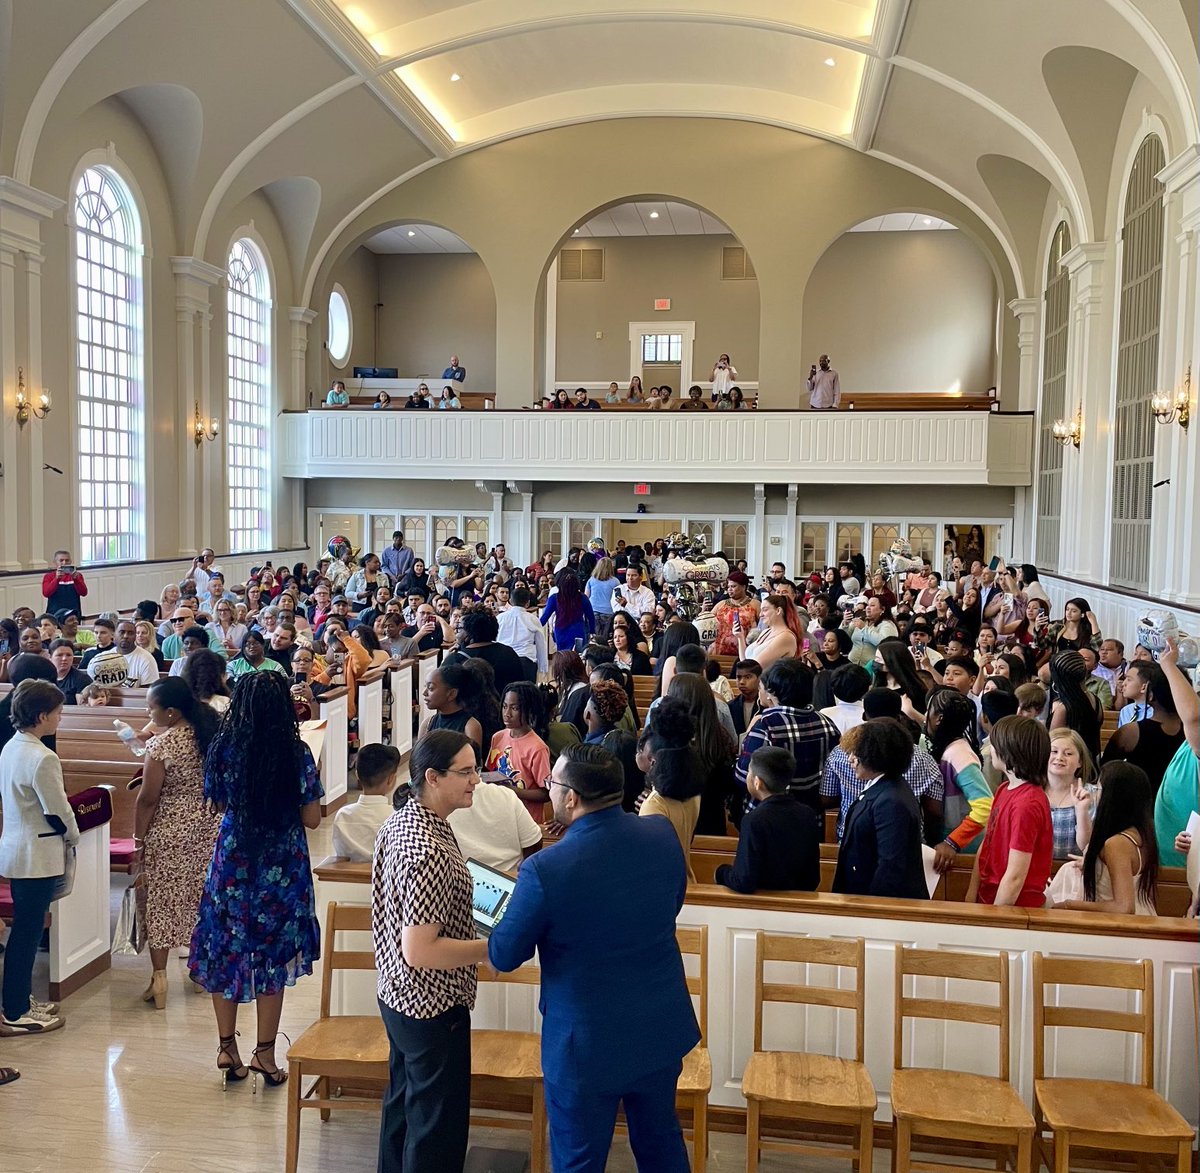 Thank you ⁦@frontstreetumc⁩ for hosting today’s 5th grade promotion ceremony! Congrats to our students…we wish you all the best in Middle School! ⁦@ABSSPublic⁩ #CommunitySupport